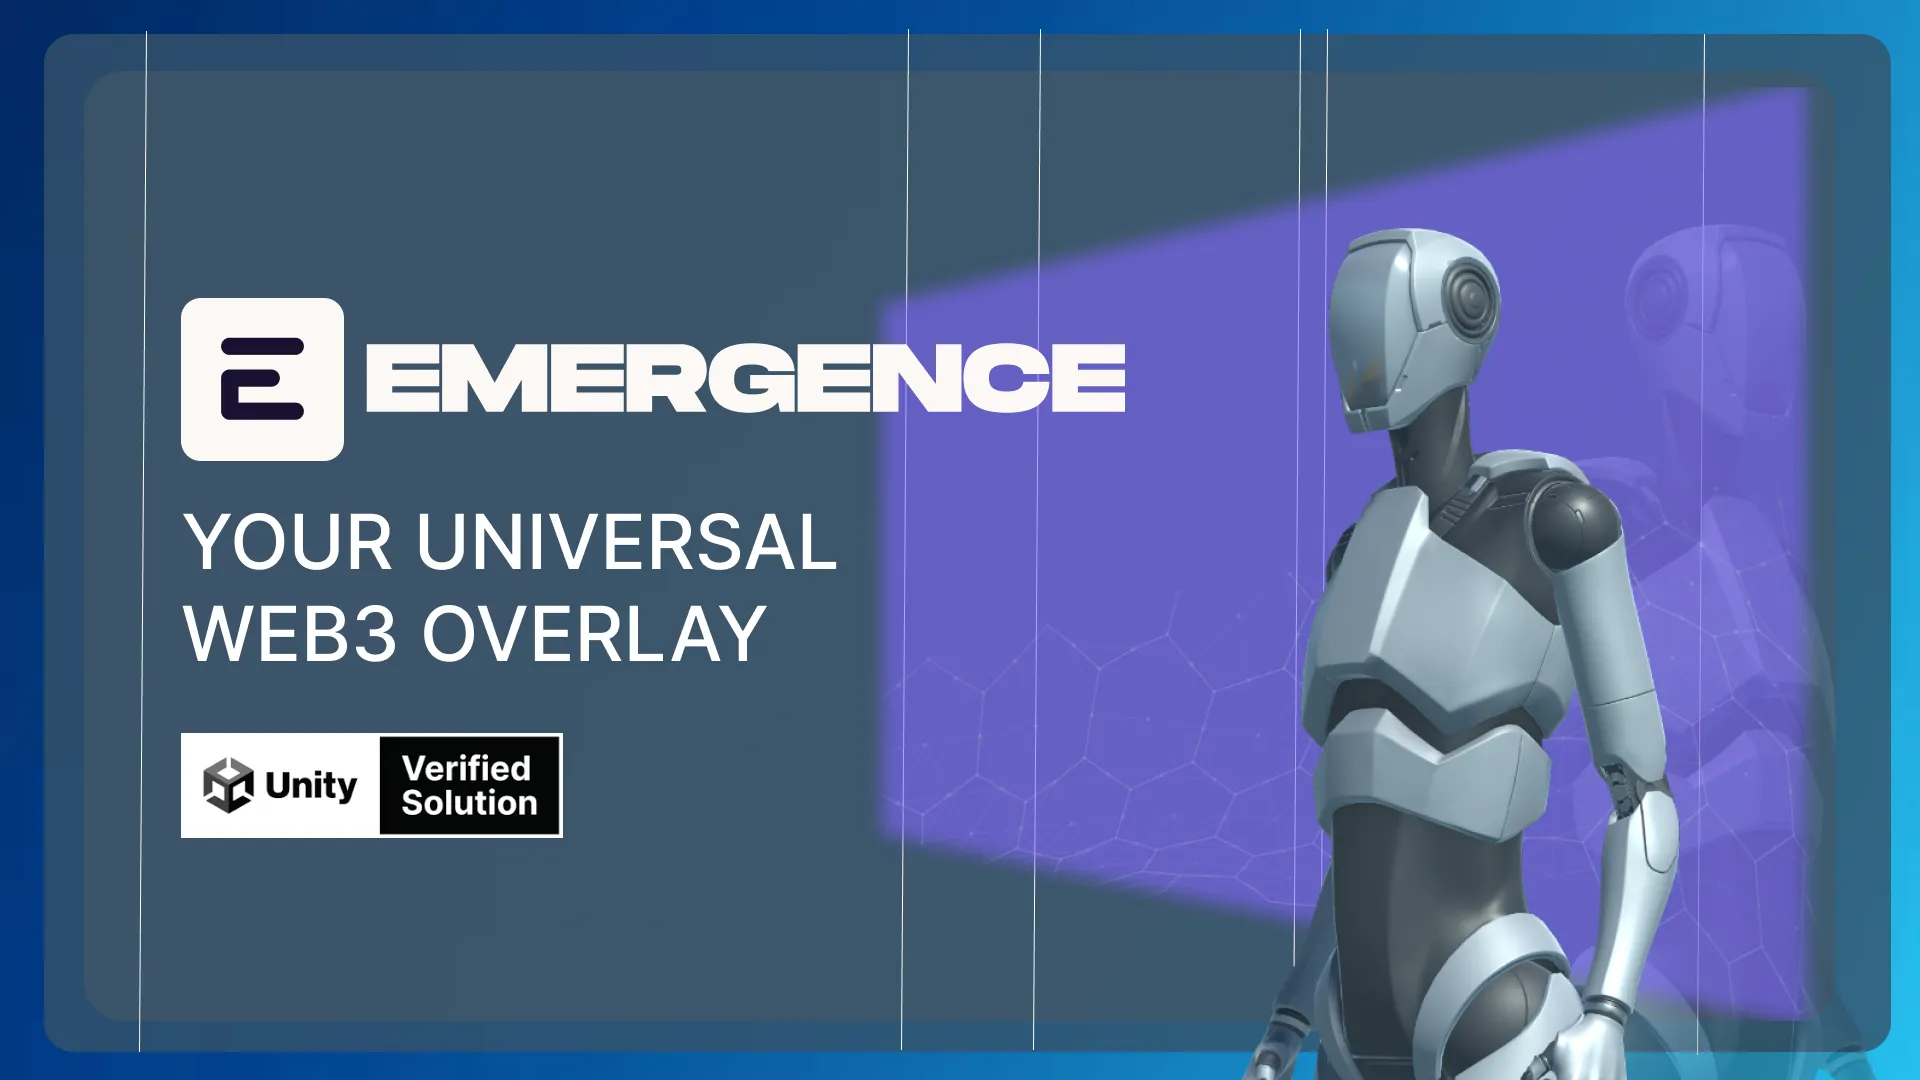 logos for Emergence and Unity alongside a robot avatar mirrored on two sides of a screen, implying interoperable gaming 